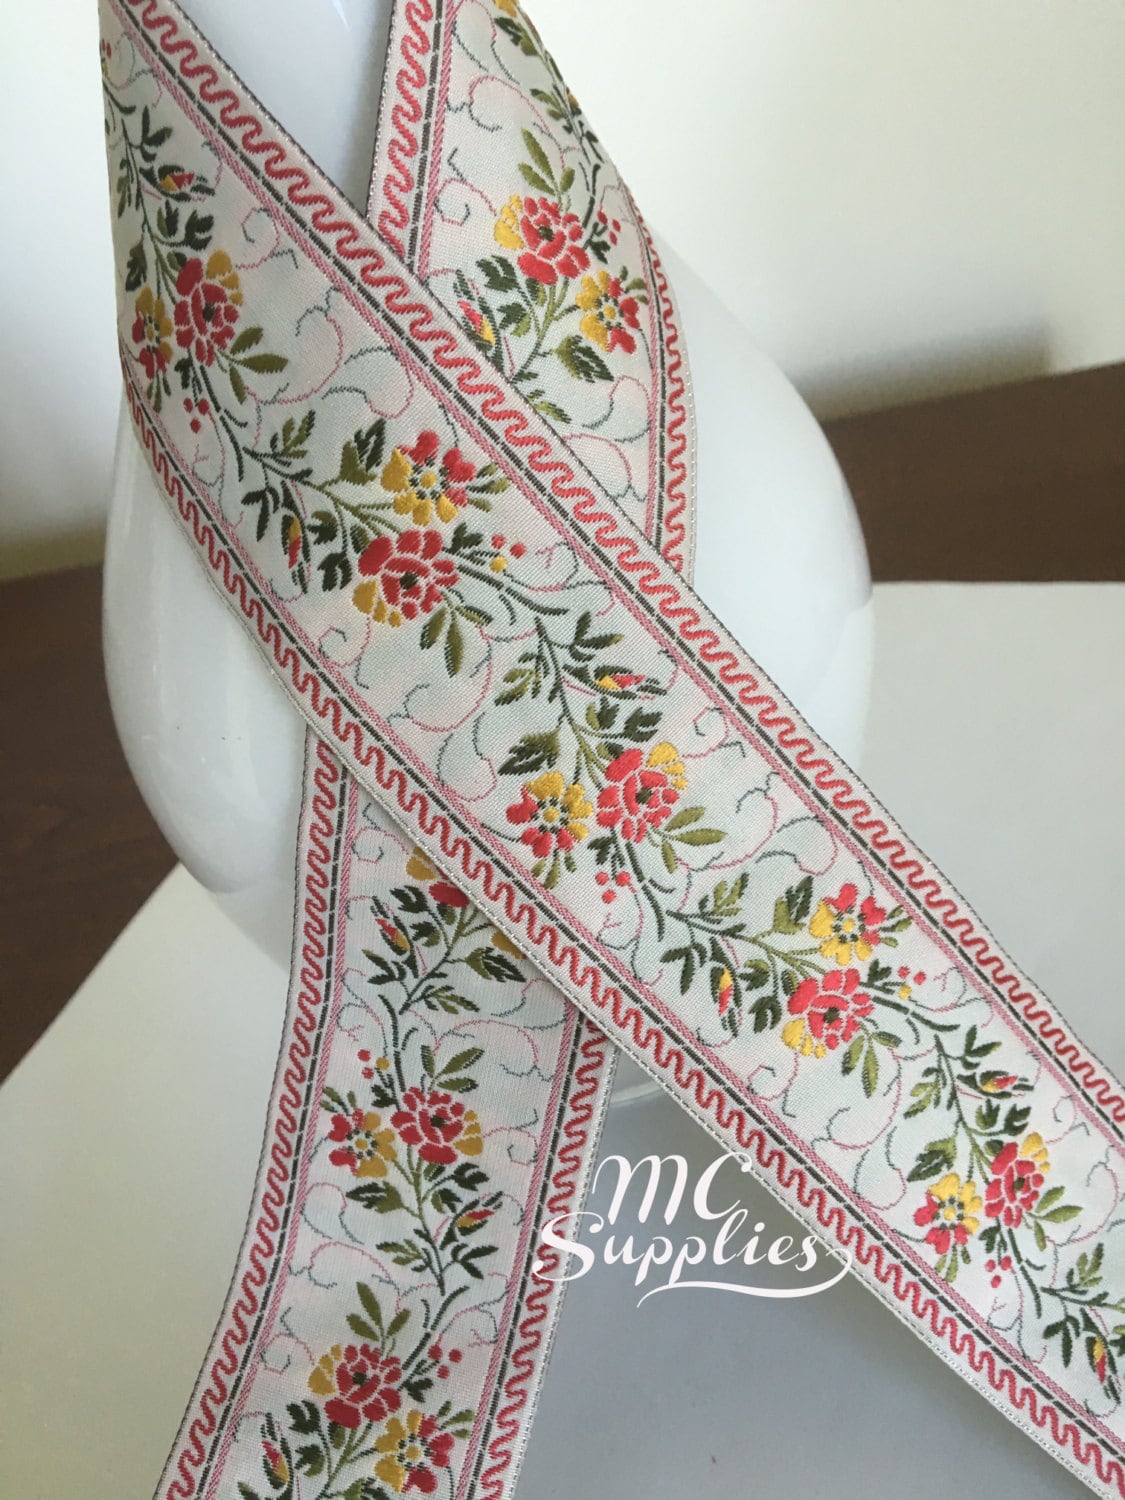 Embroidered Ribbon with Edelweiss and Alpine Flowers